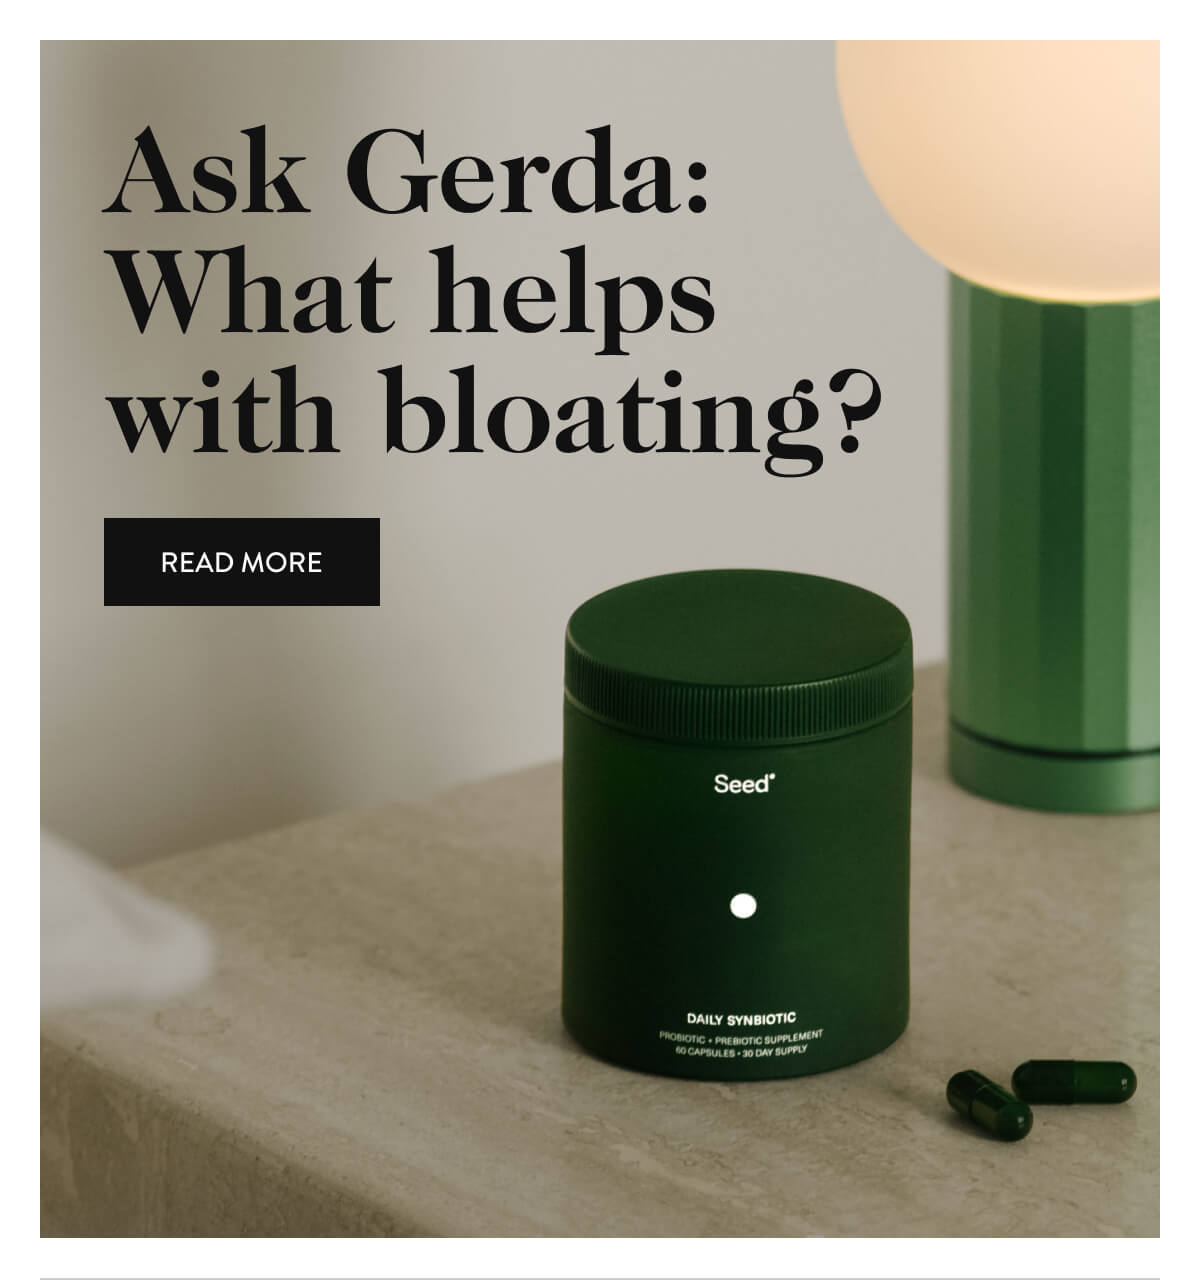 Ask Gerda: What helps with bloating? - read more